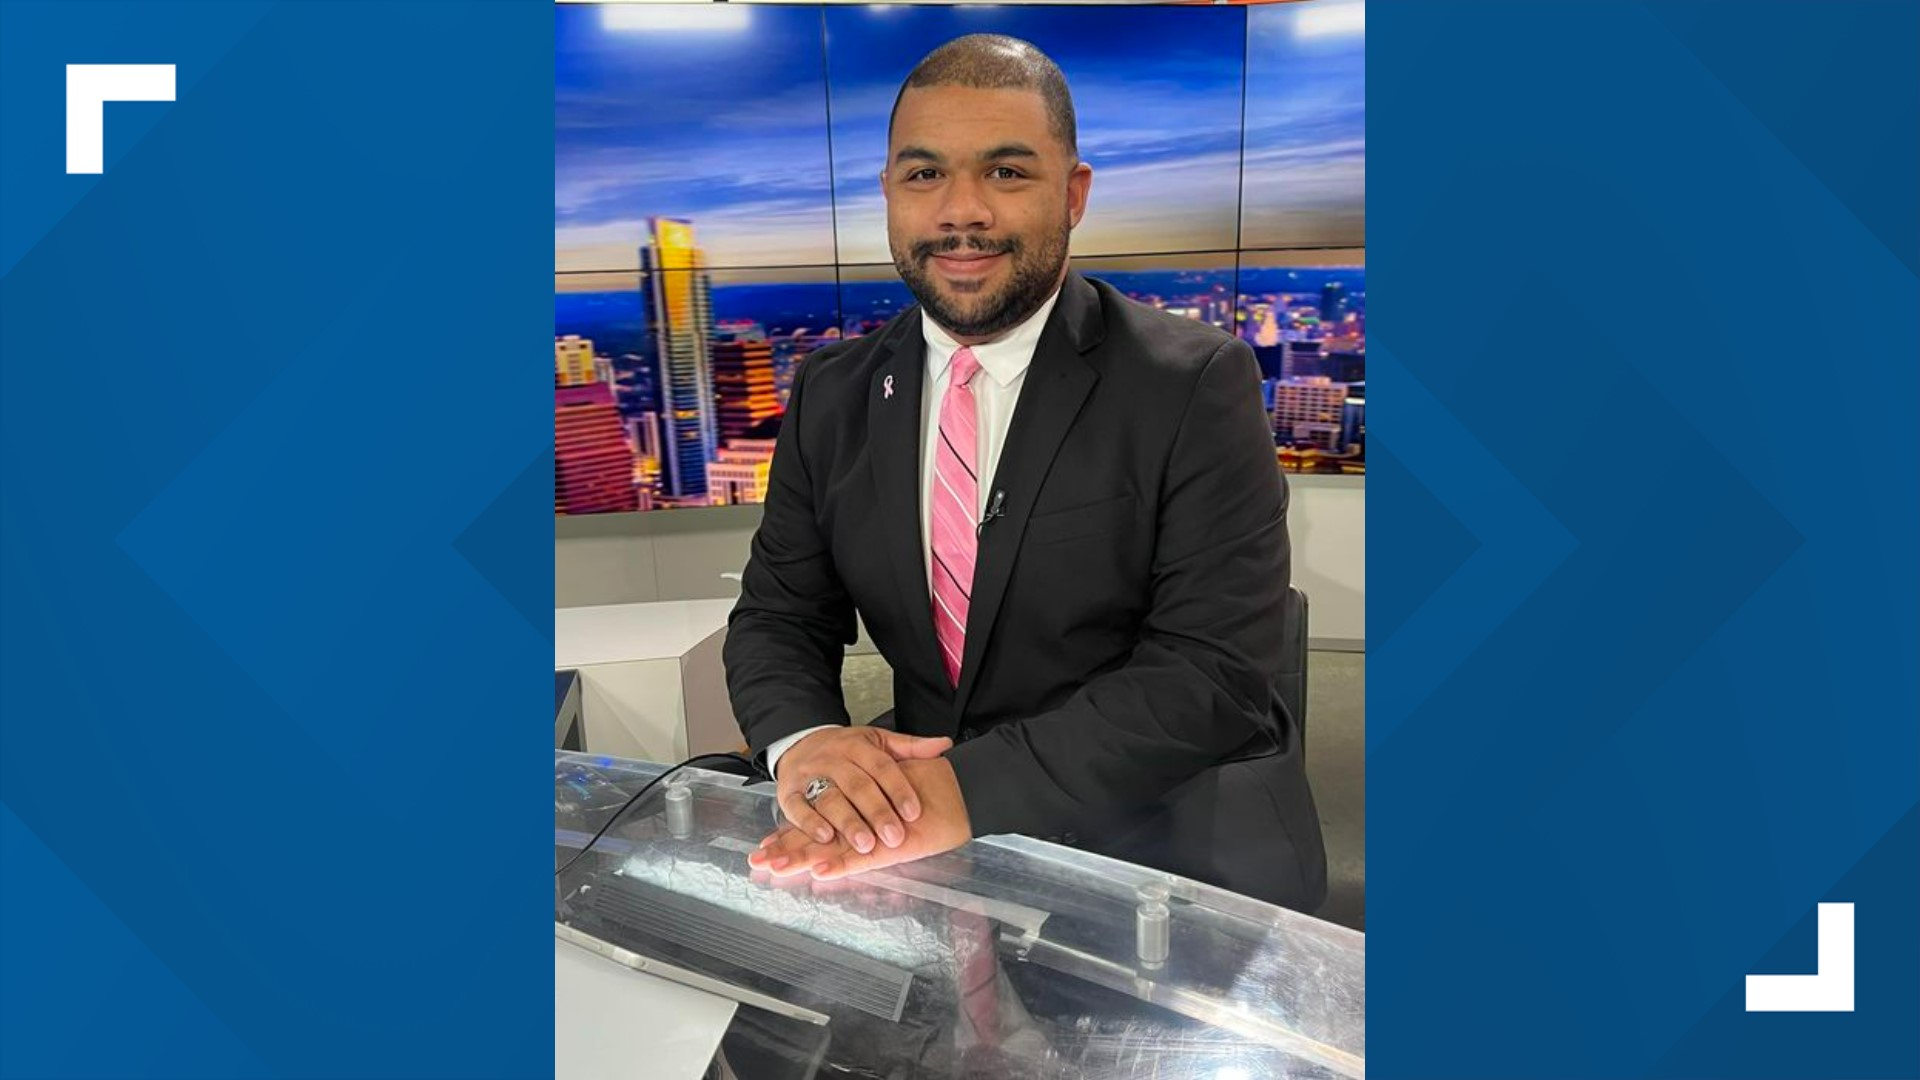 Meteorologist Jordan Darensbourg has details on a very important fundraiser to him